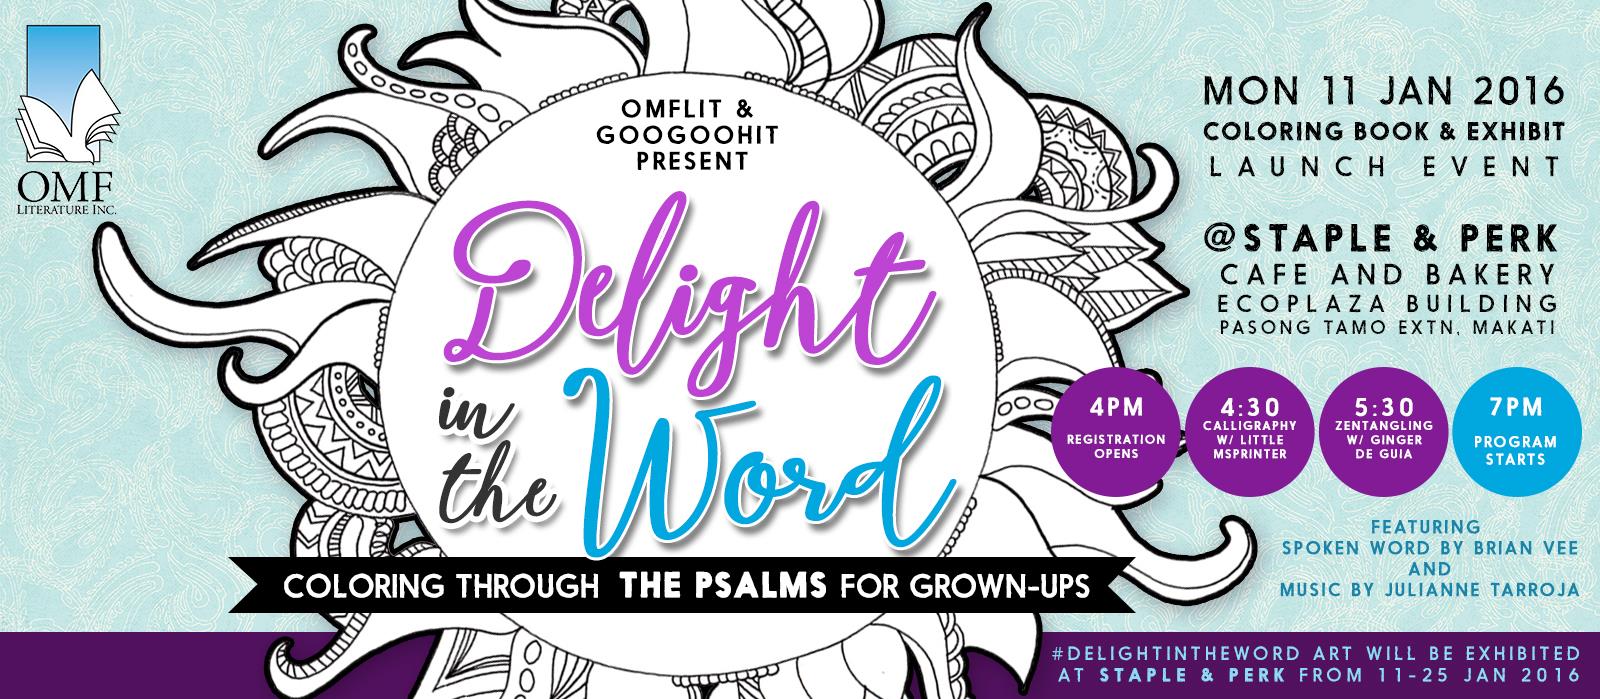 Delight in the Word launch clock Monday, January 11 at 4 PM - 9 PM Next Week · 88°F / 73°F Chance of a Thunderstorm pin Show Map Staple and Perk Bakery Ecoplaza Building, 2306 Pasong Tamo Extension, 1231 Makati, Philippines Free entrance with every purchase of #DelightInTheWord coloring book, published by OMFLit. Just show your copy at the door, or buy one on the day! #DelightInTheWord art will be exhibited at Staple and Perk from Jan 11-25, 2016. 4pm - Registration opens 4:30-5:30pm - Basic Calligraphy with LittleMsPrinter 5:30-6:30pm - ZenTangling with Ginger de Guia 7pm - PROGRAM START Featuring Spoken Word performance by Brian Vee and Musical performance by Julianne Tarroja